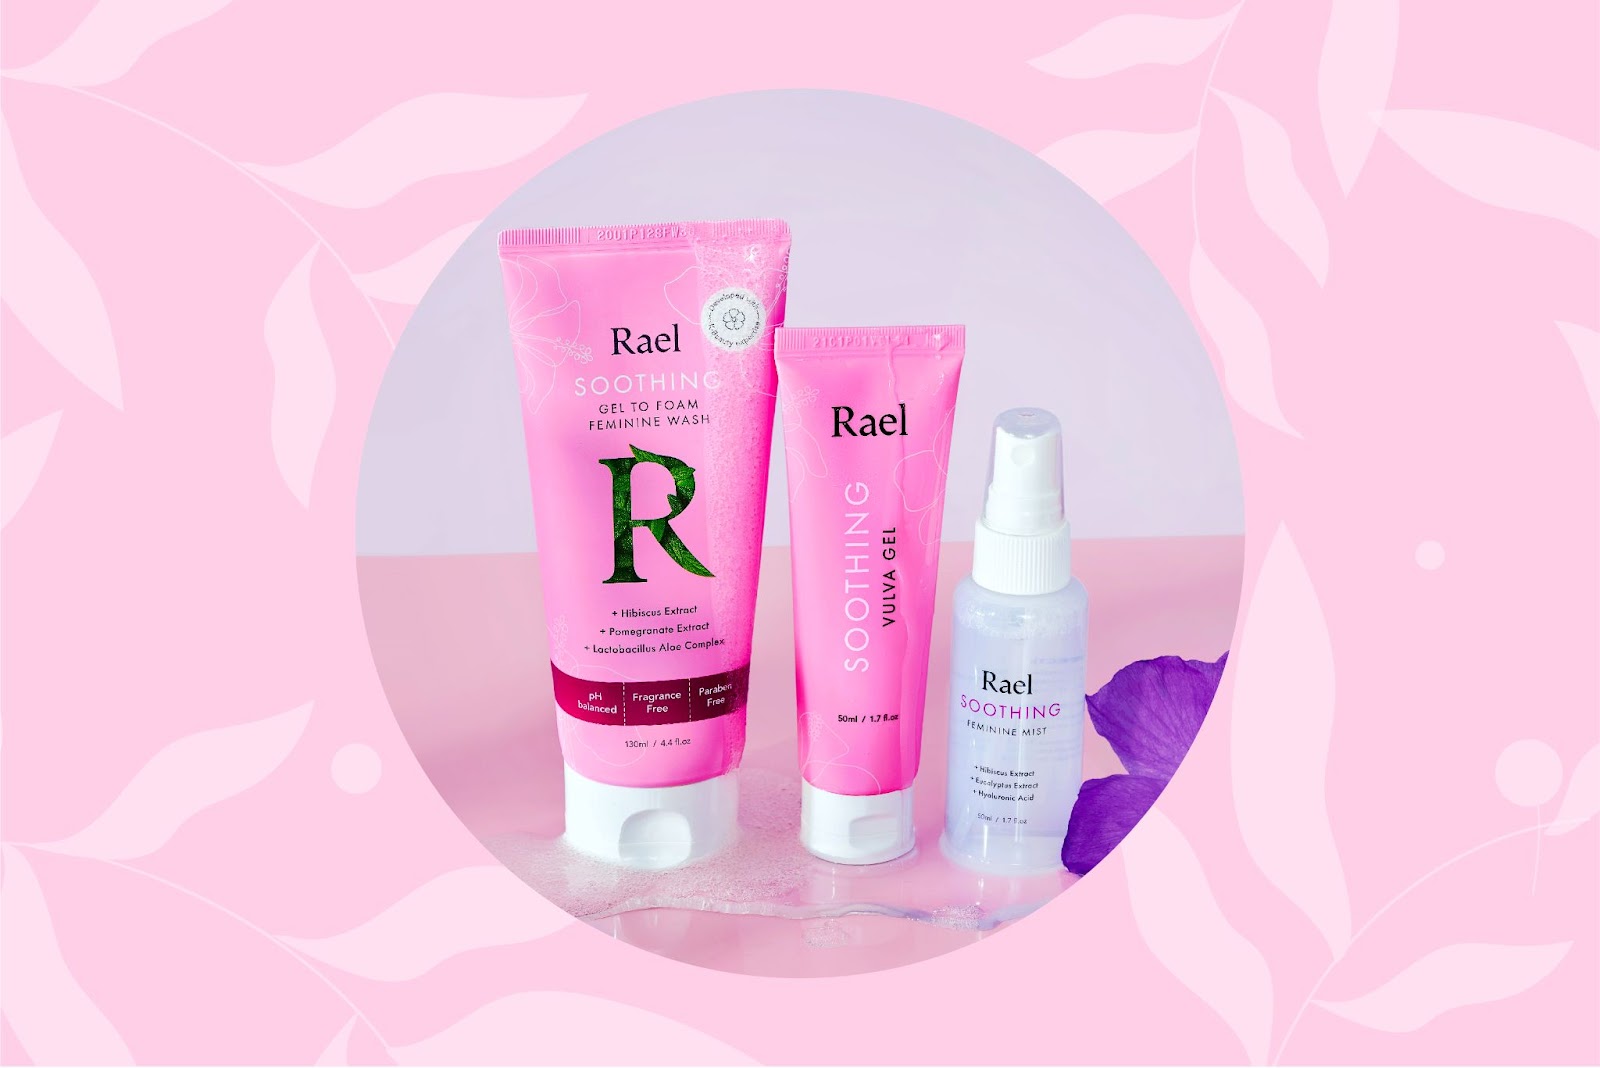 Rael products used for remedying vaginal yeast infections sitting on a pink table.